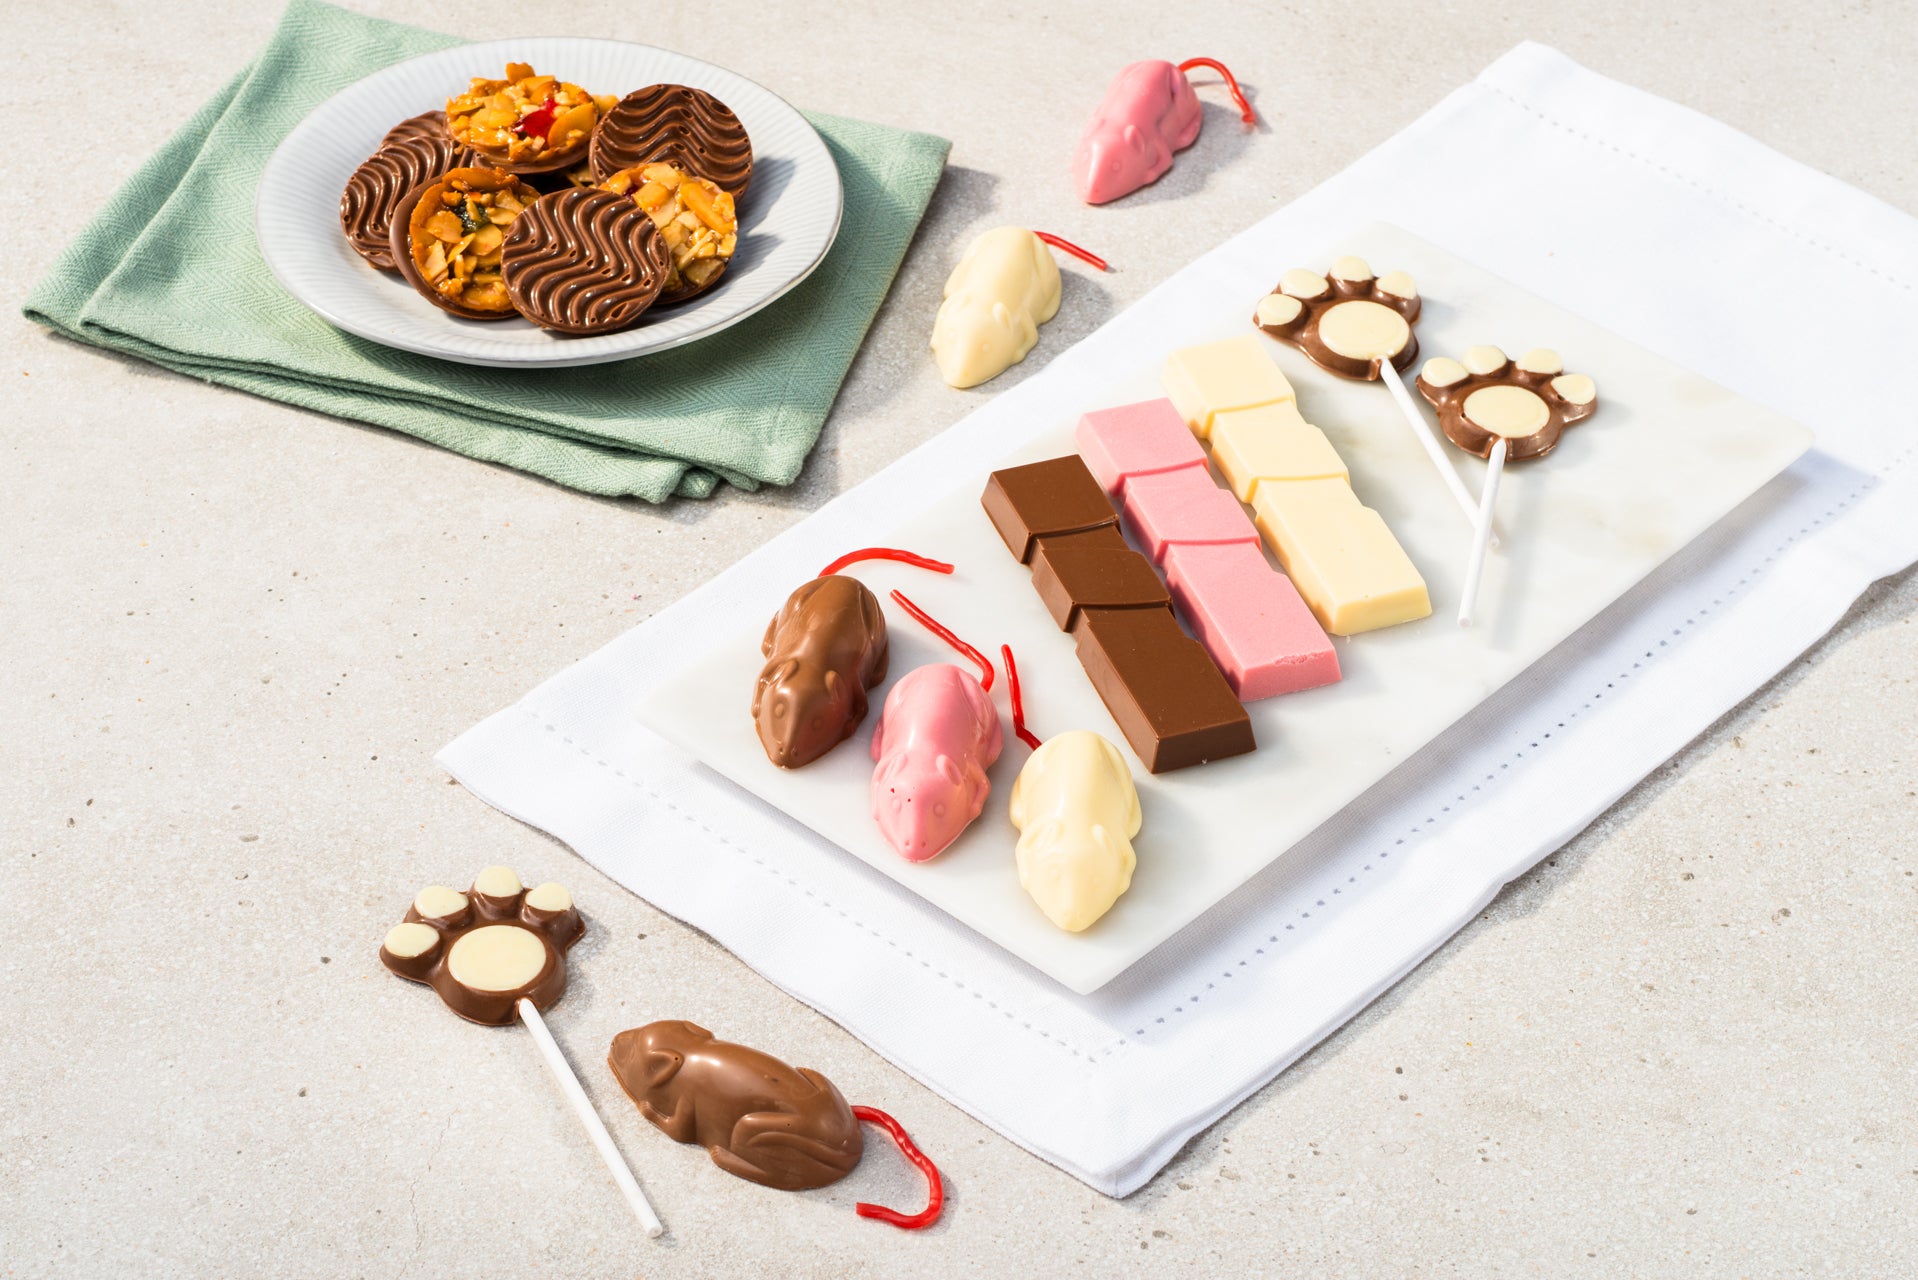 A selction of family favourites: including chocolate mice, chocolate lollypops and florentines